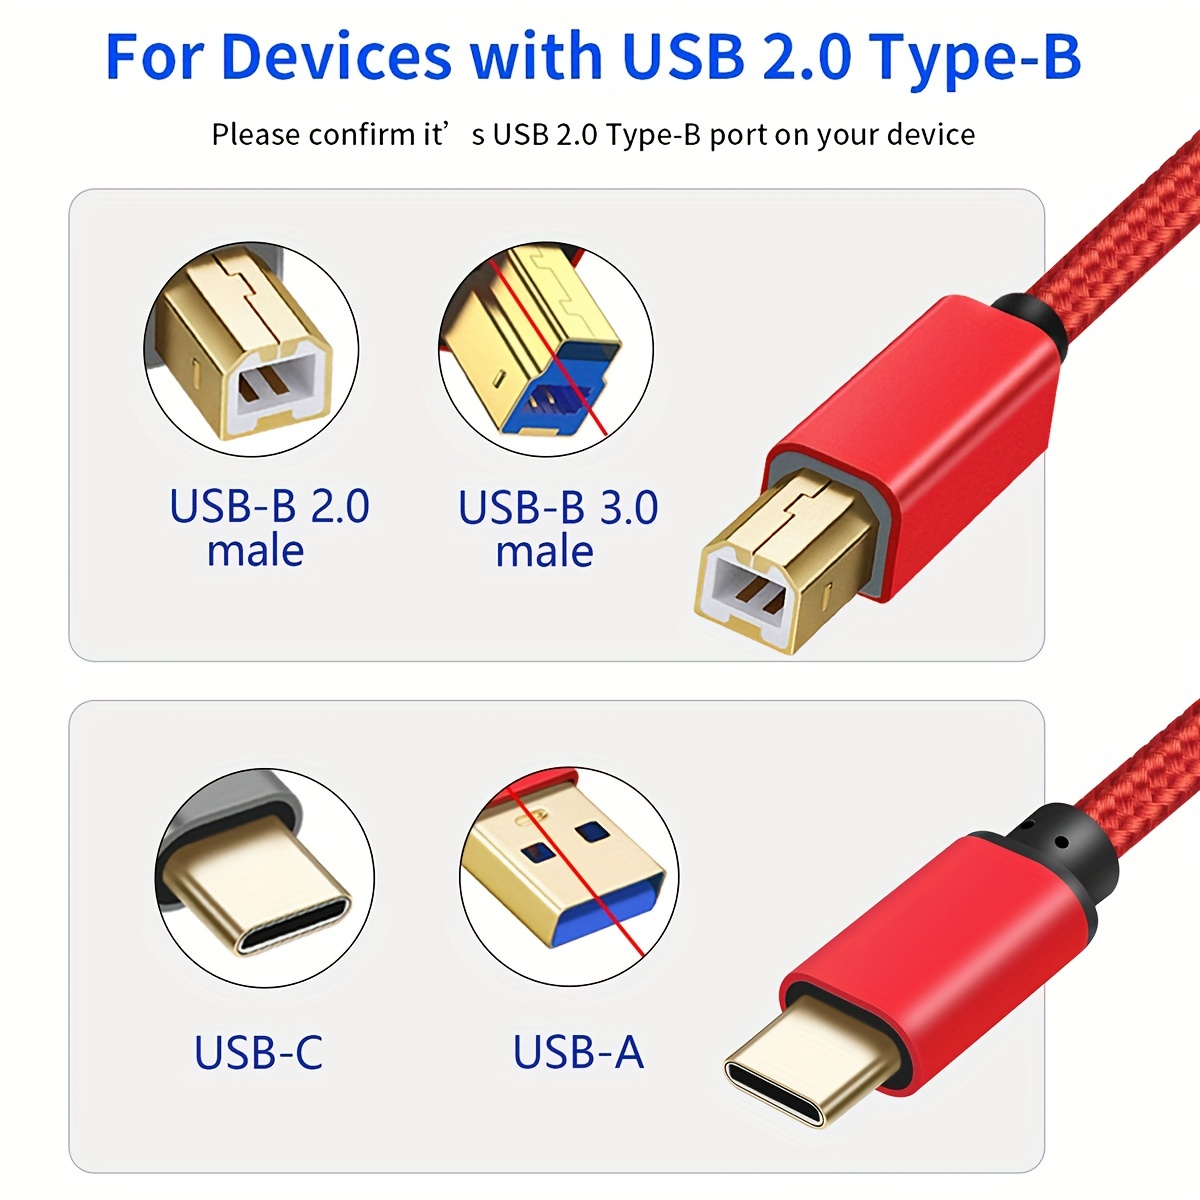 USB B MIDI Cable for Instruments 3 FT, Ancable USB A to USB B cable Co